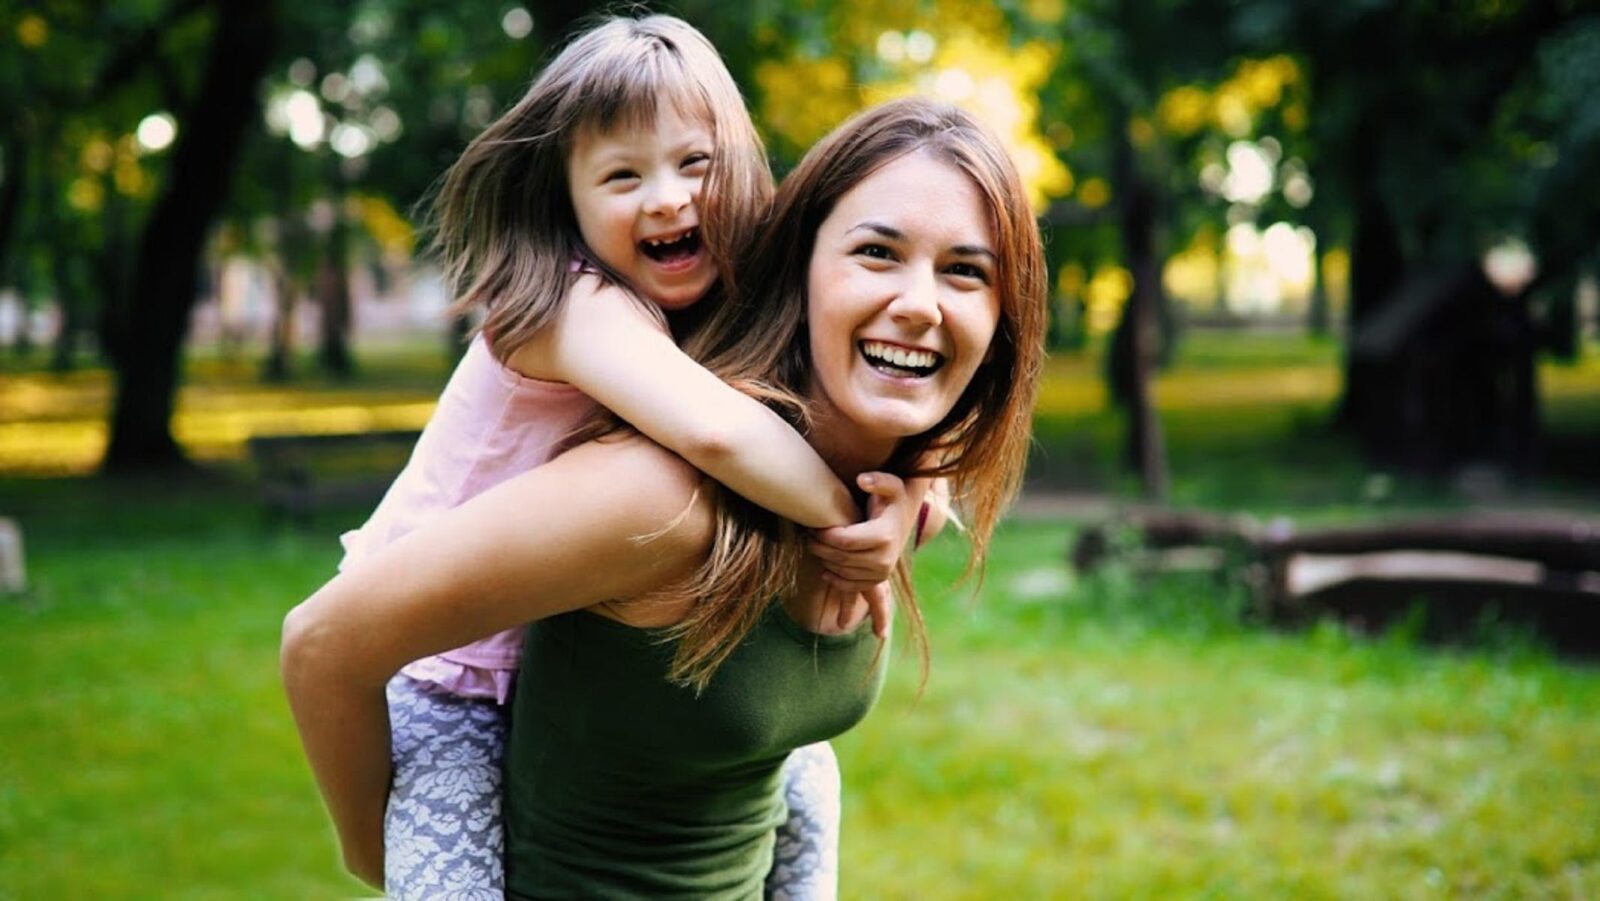 a woman and a child in the park smiling